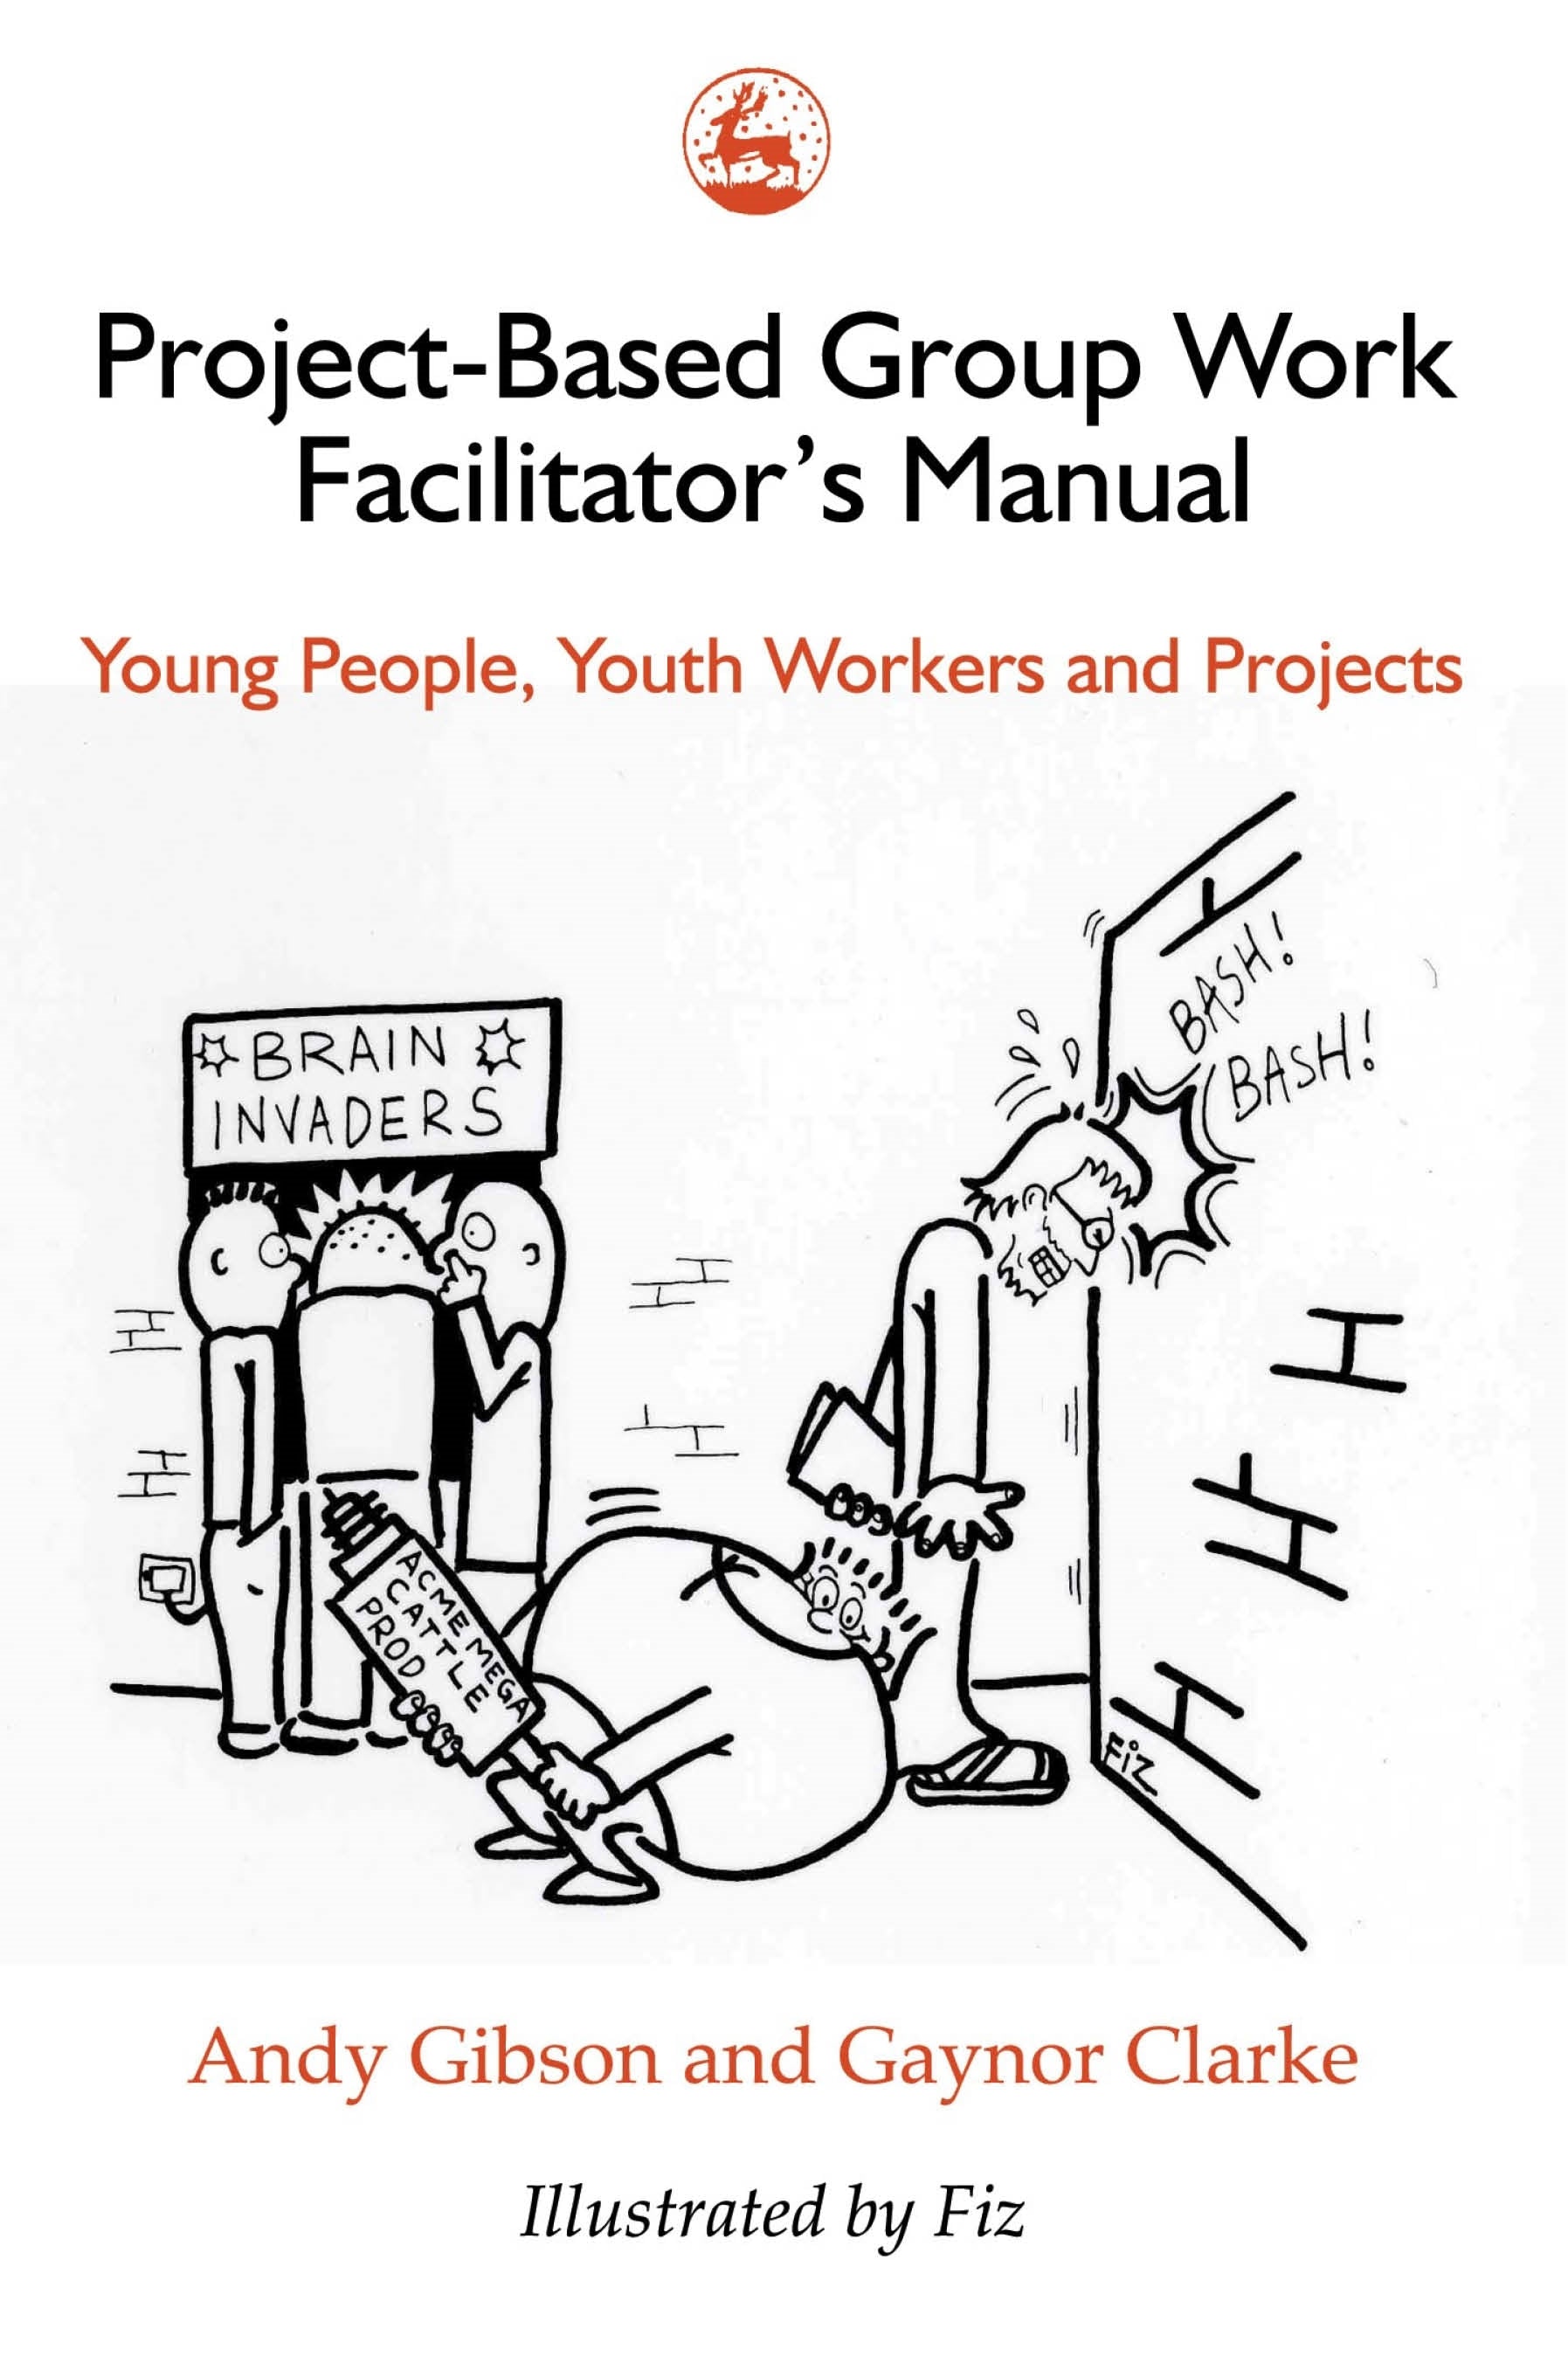 Project-Based Group Work Facilitator's Manual by Andy Gibson